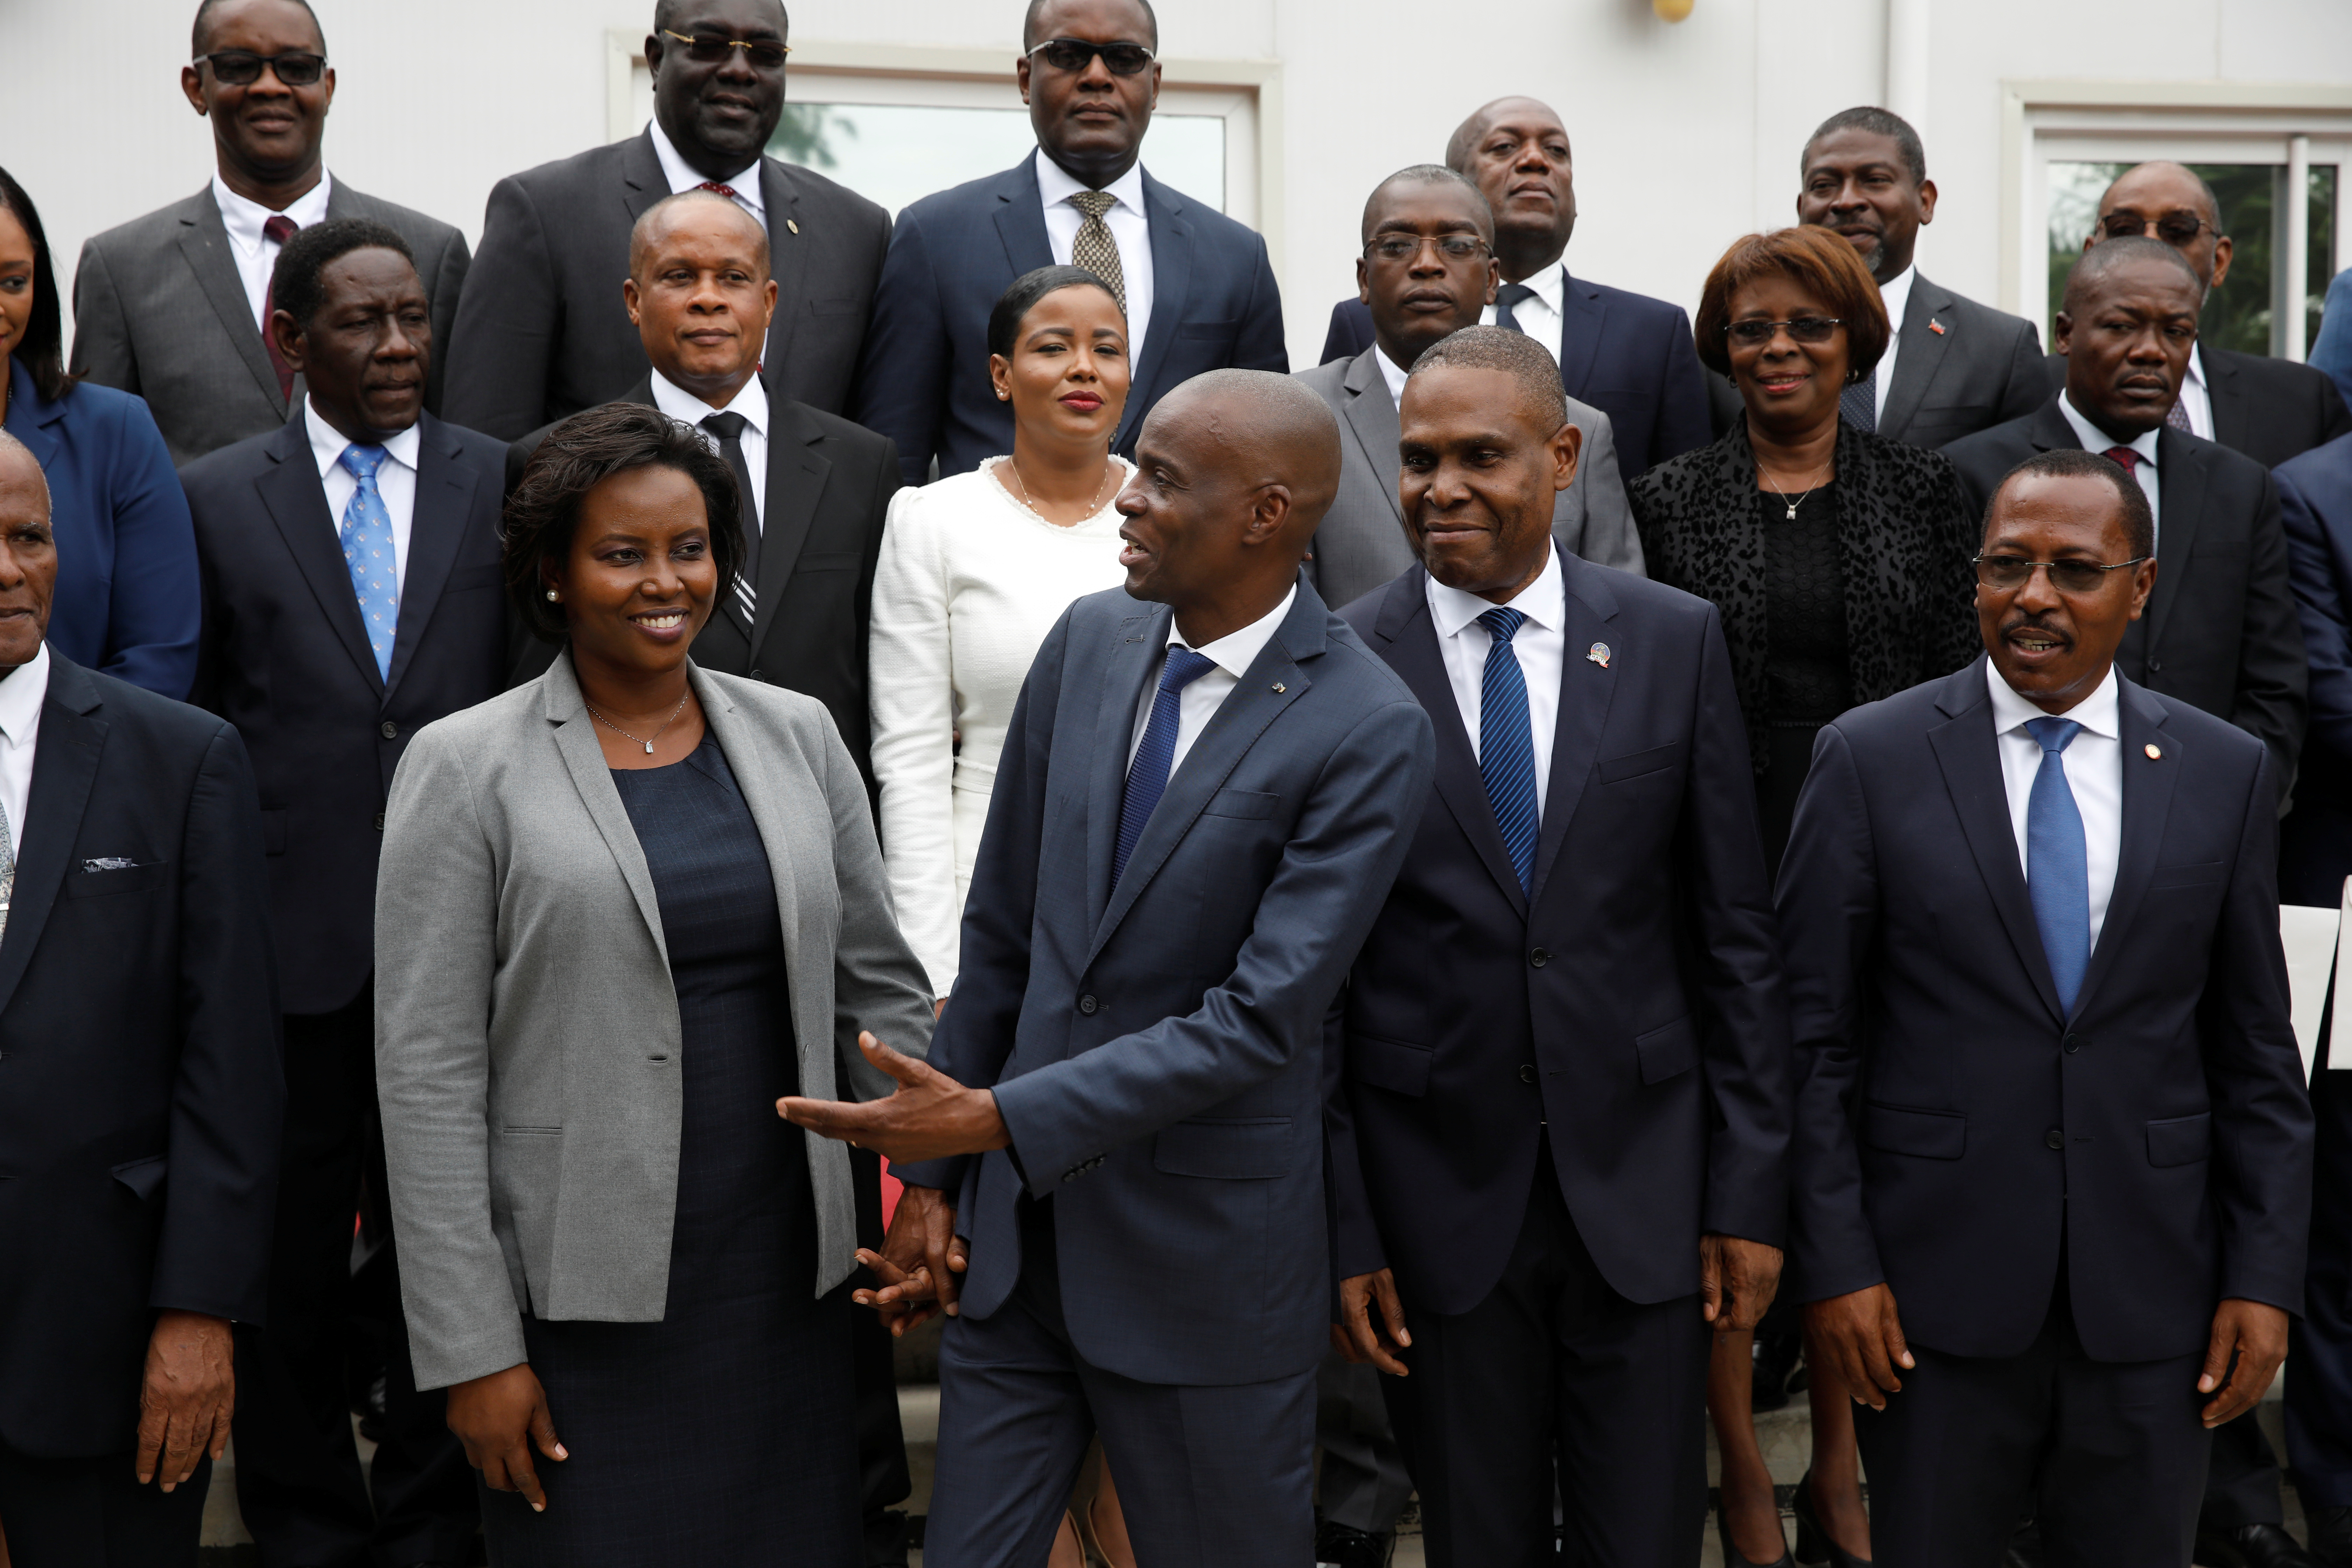 Haiti's President Moise, first lady Martine and PM Ceant pose for a picture with members of the Government in the gardens of the National Palace during the inauguration ceremony in Port-au-Prince